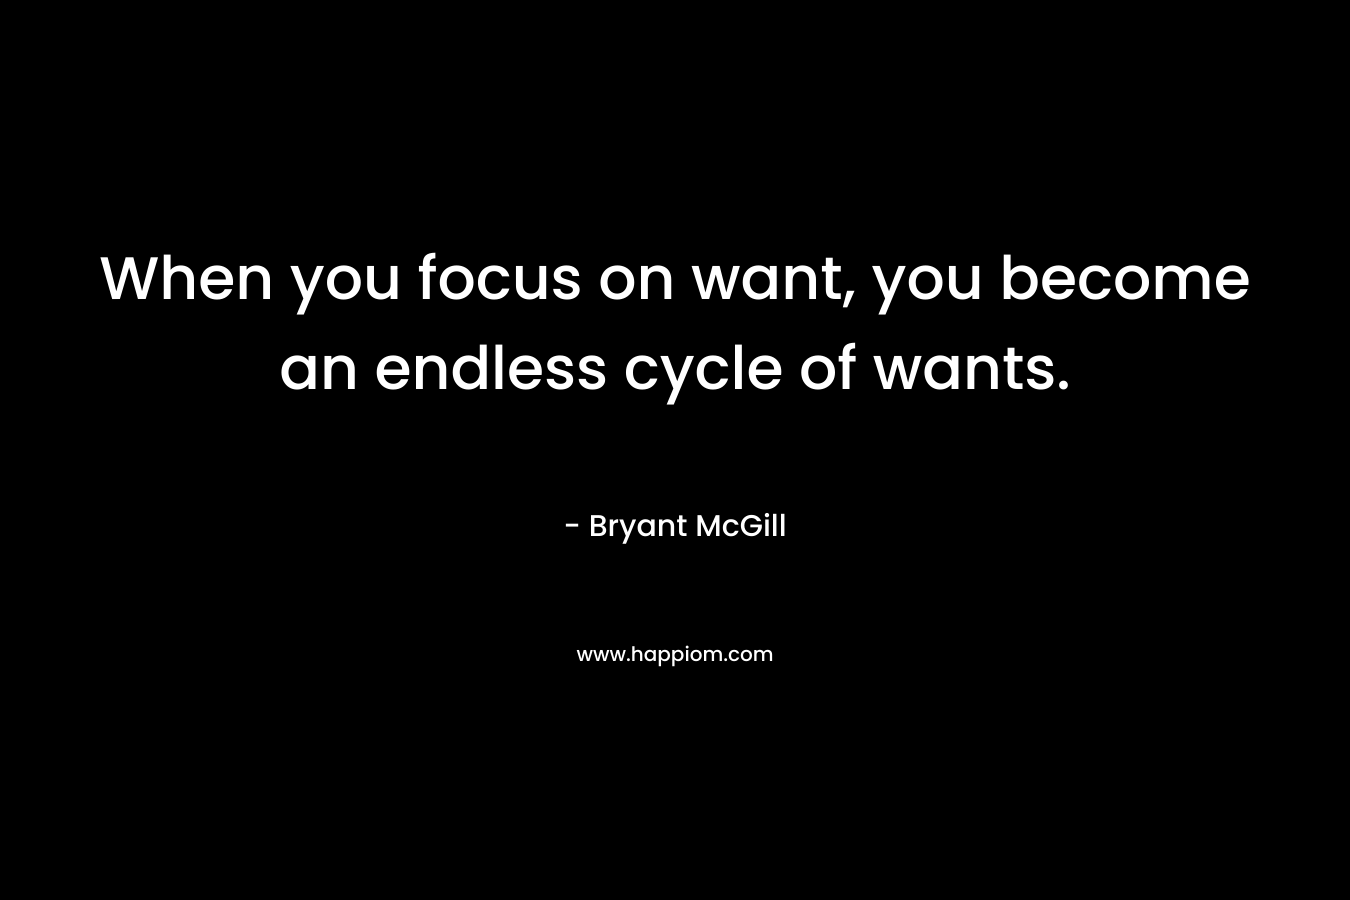 When you focus on want, you become an endless cycle of wants.